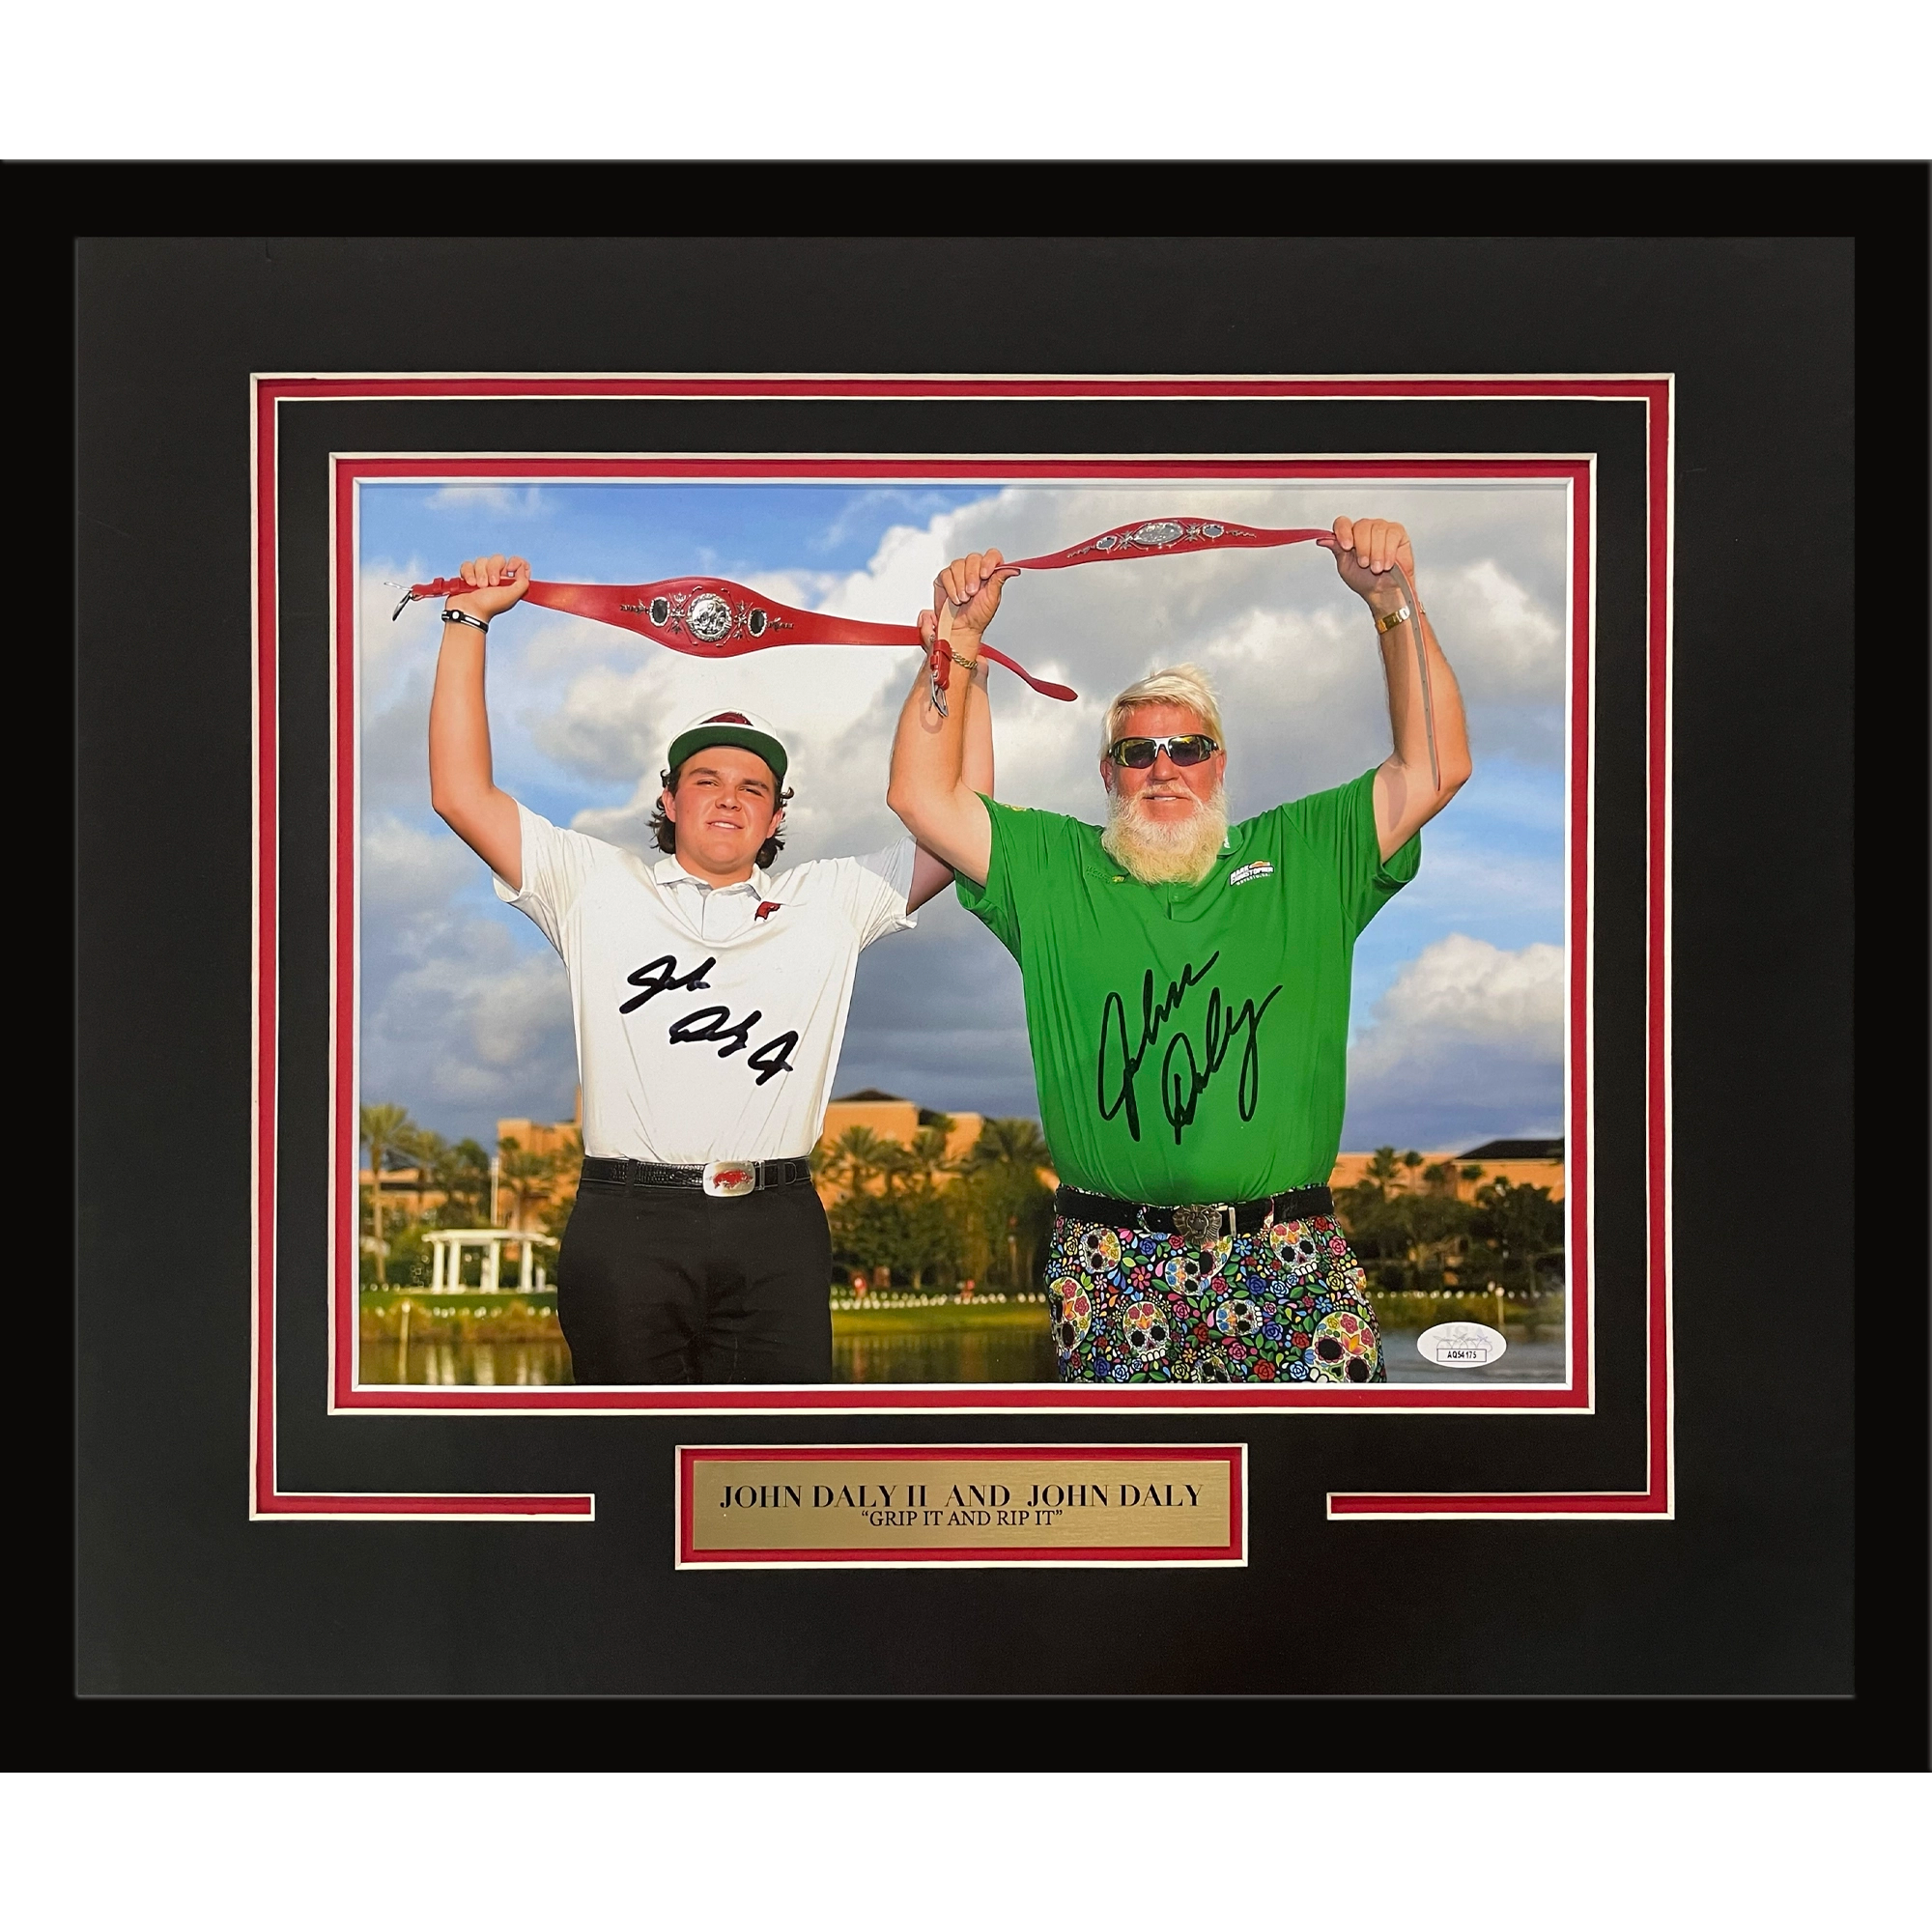 John Daly And John Daly II Autographed Golf (PNC Championship) Deluxe Framed 11x14 Photo - JSA